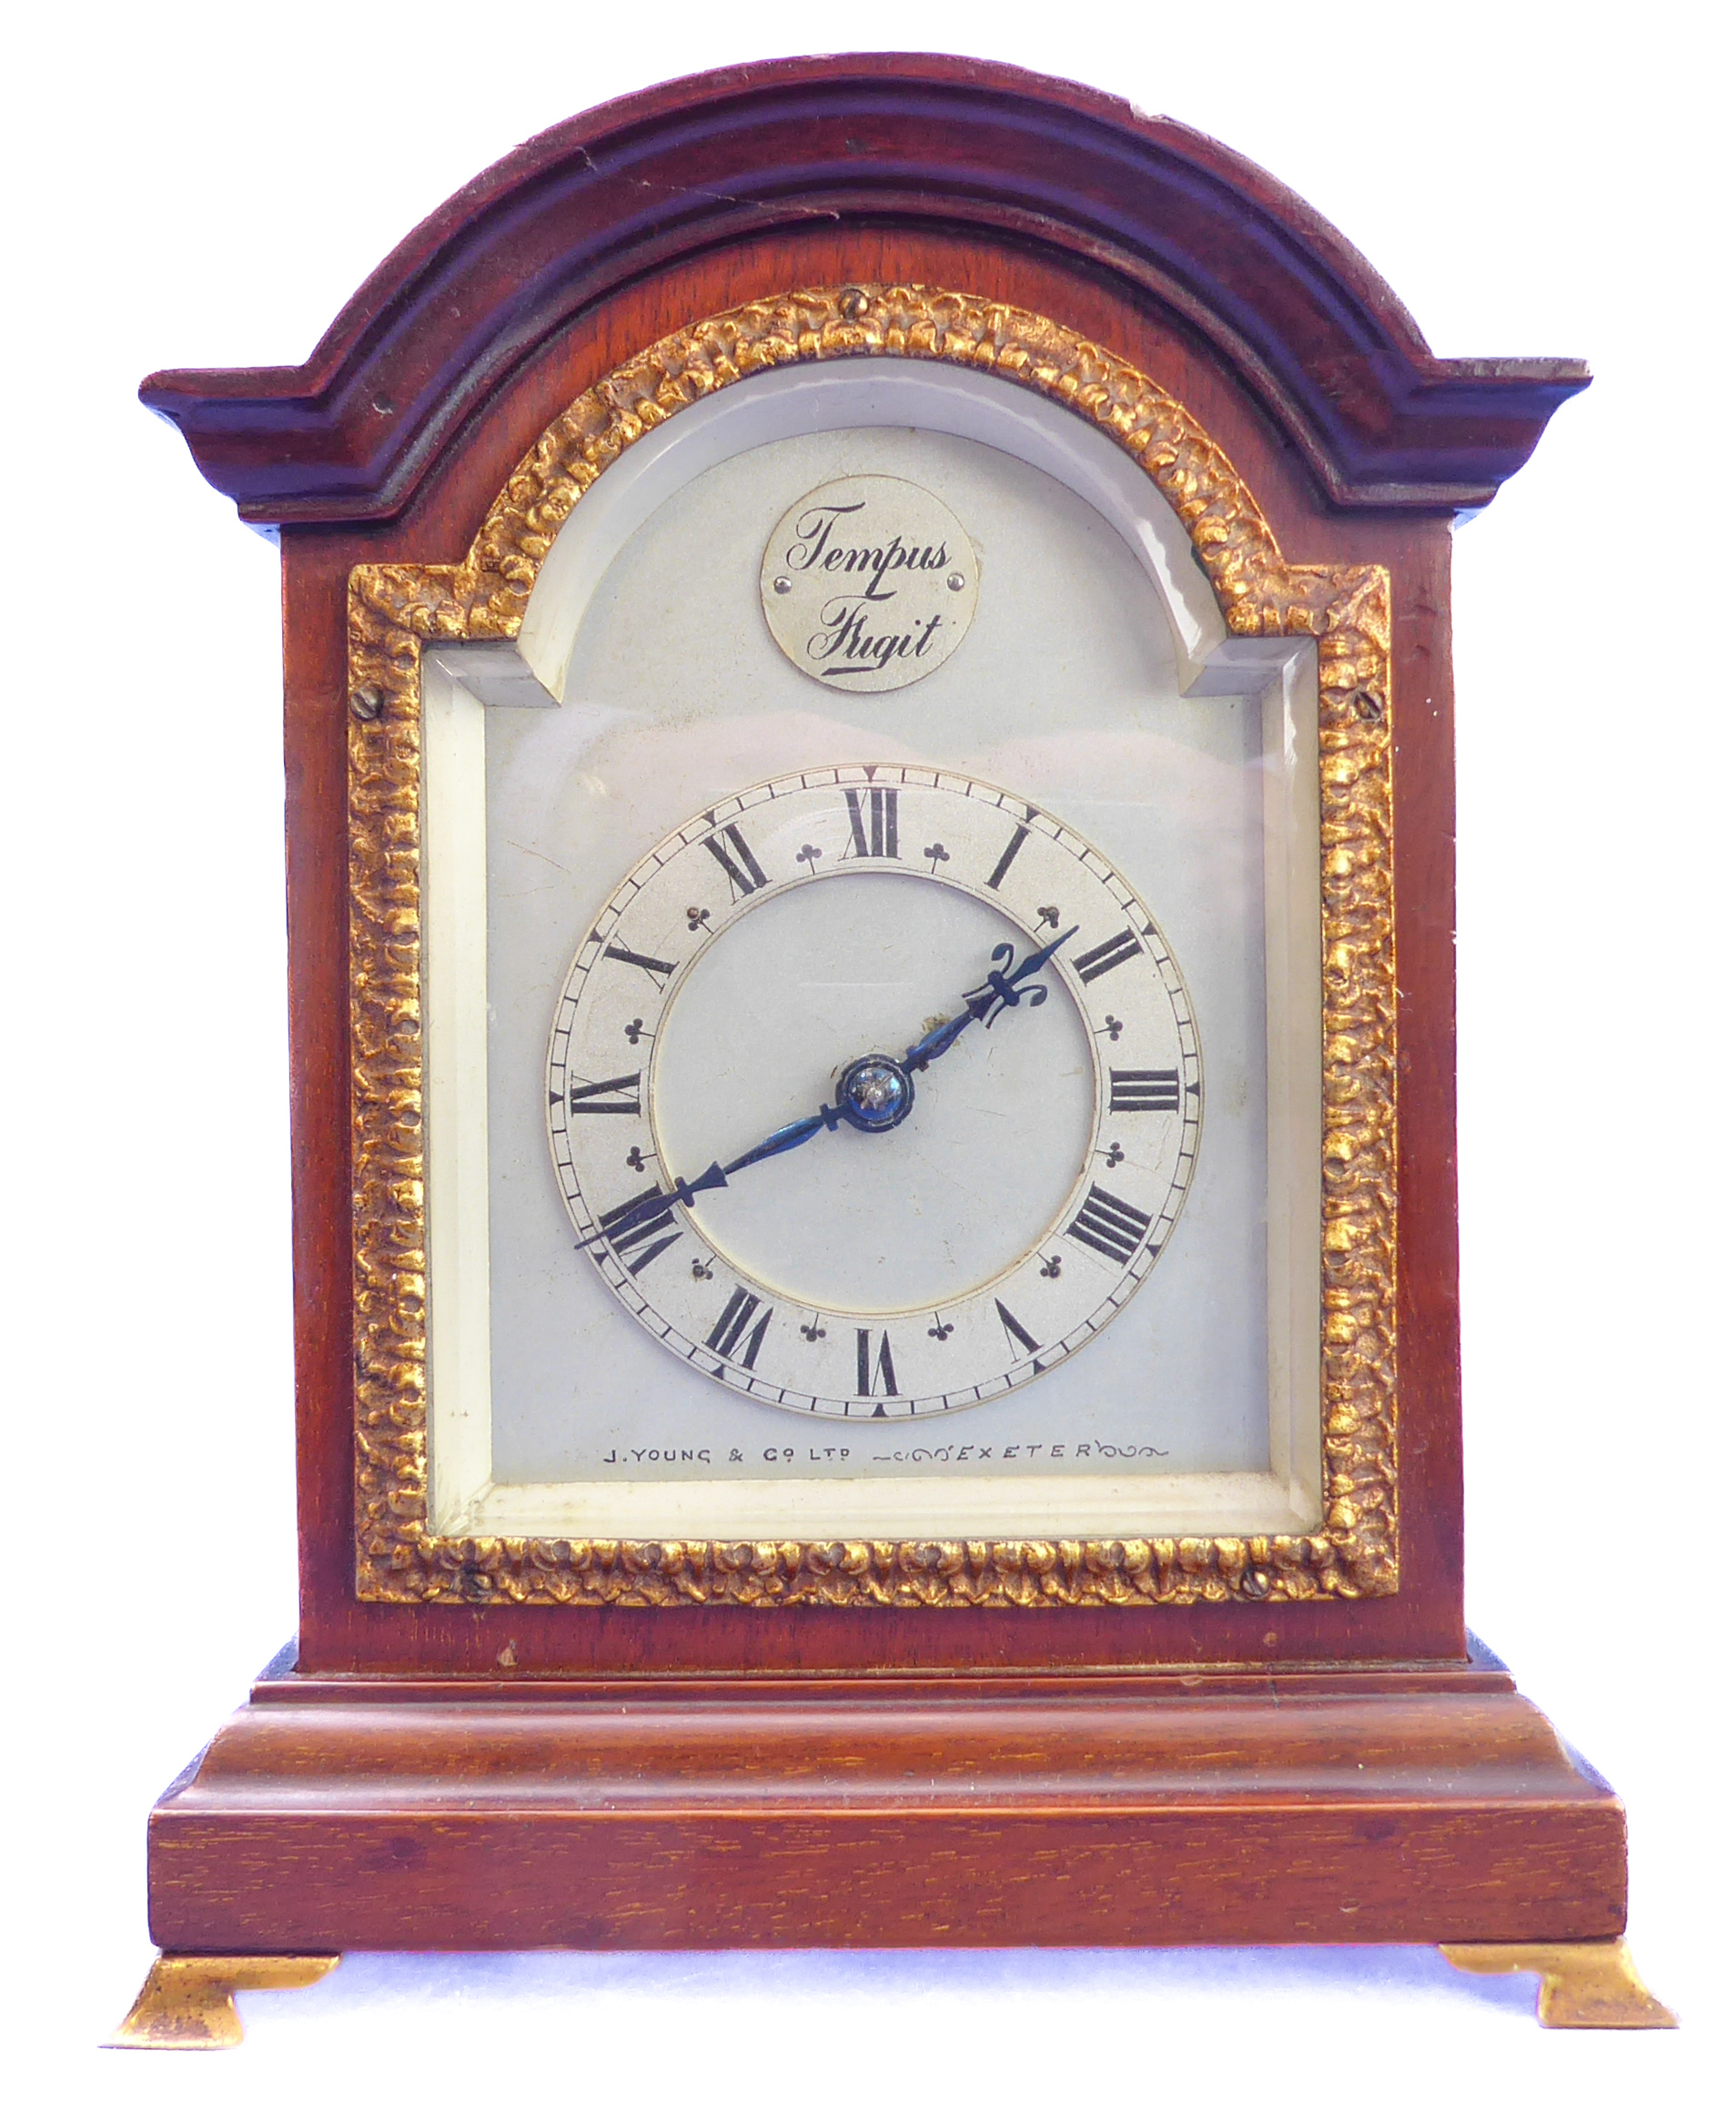 A fine quality early 20th century mahogany-cased gilt-metal-mounted mantle clock; the four-inch